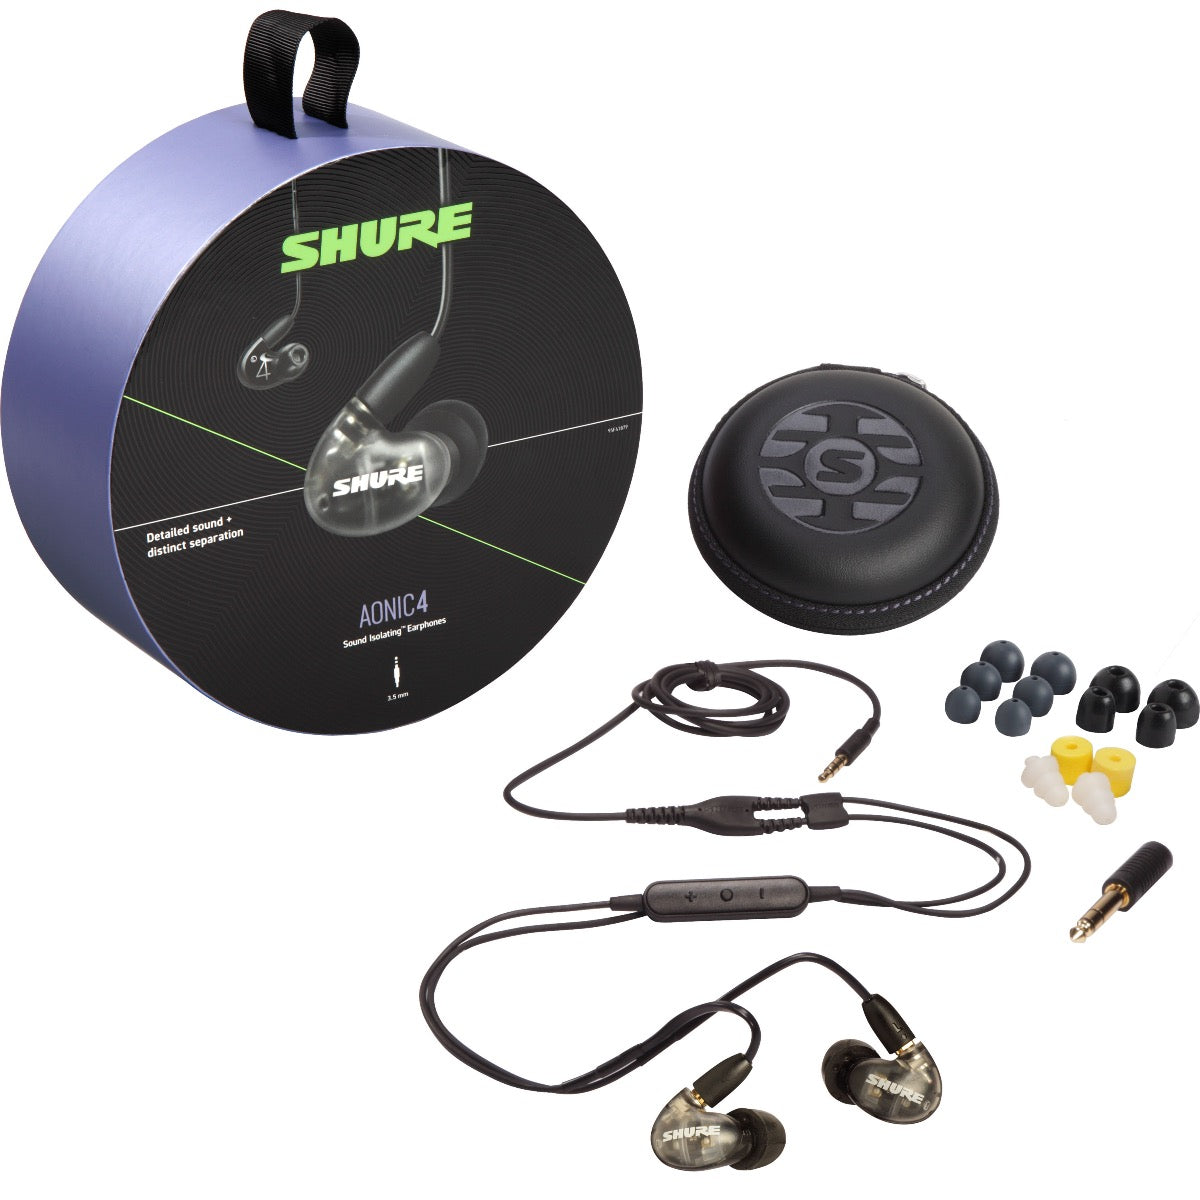 Shure AONIC 4 Sound Isolating Earphones - Clear/Black